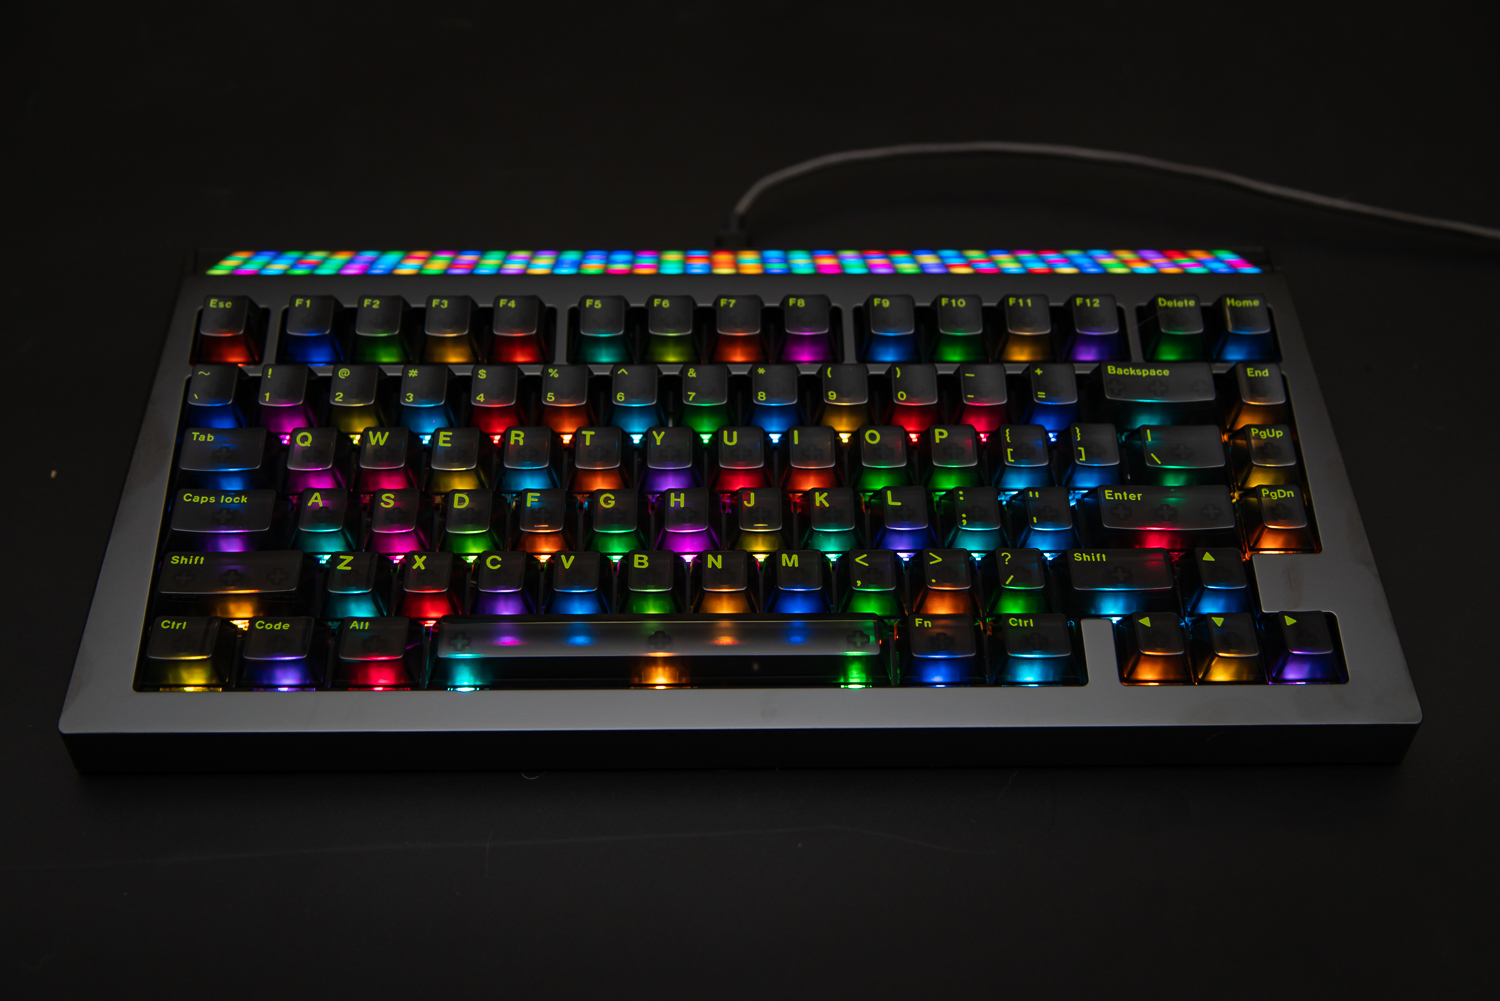 Cyberboard R2 review: Should you spend $700 on a keyboard